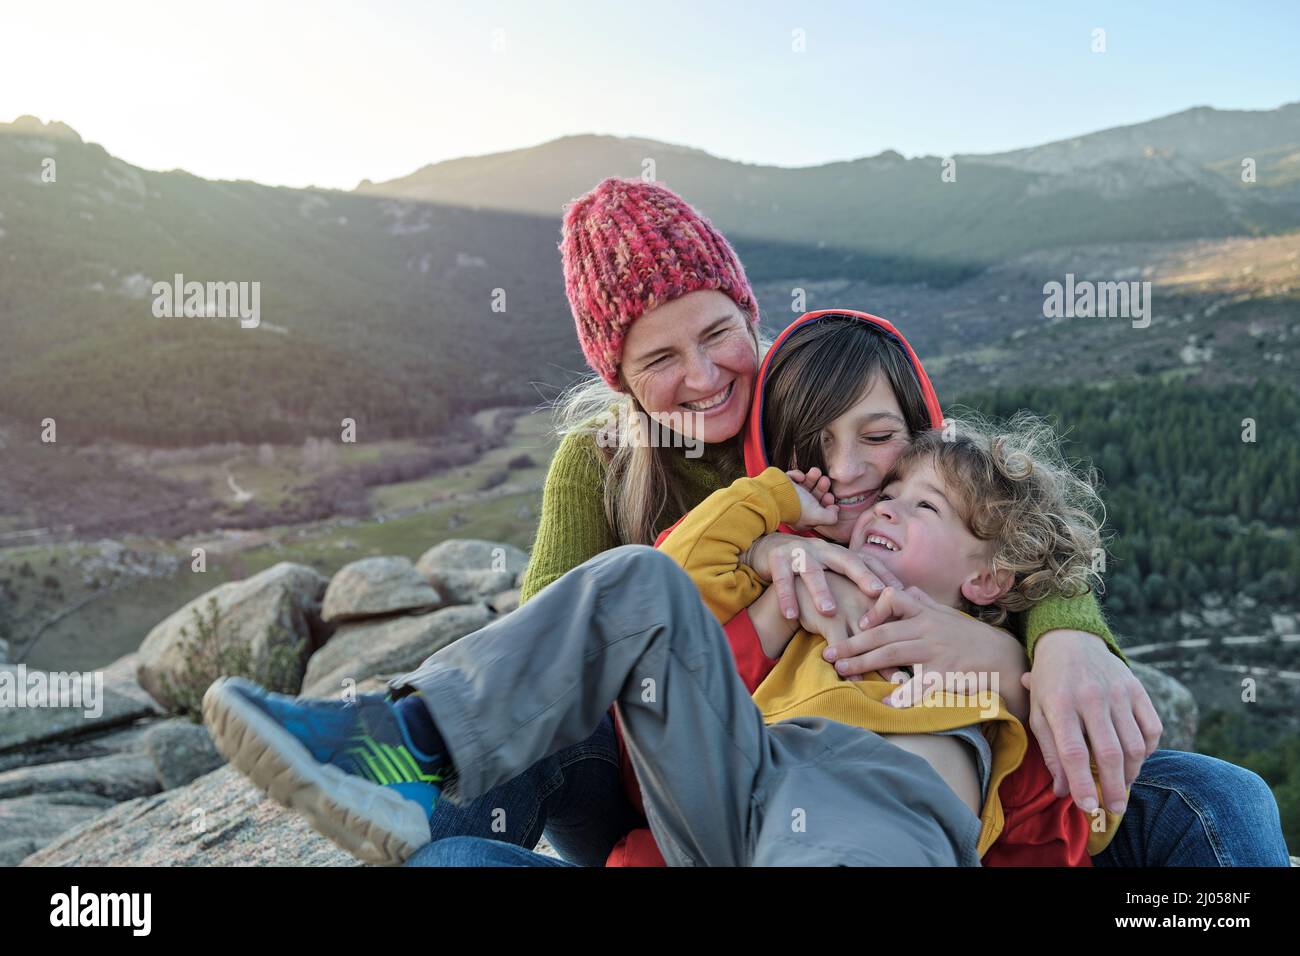 Mother plays with children as they relax in nature Stock Photo